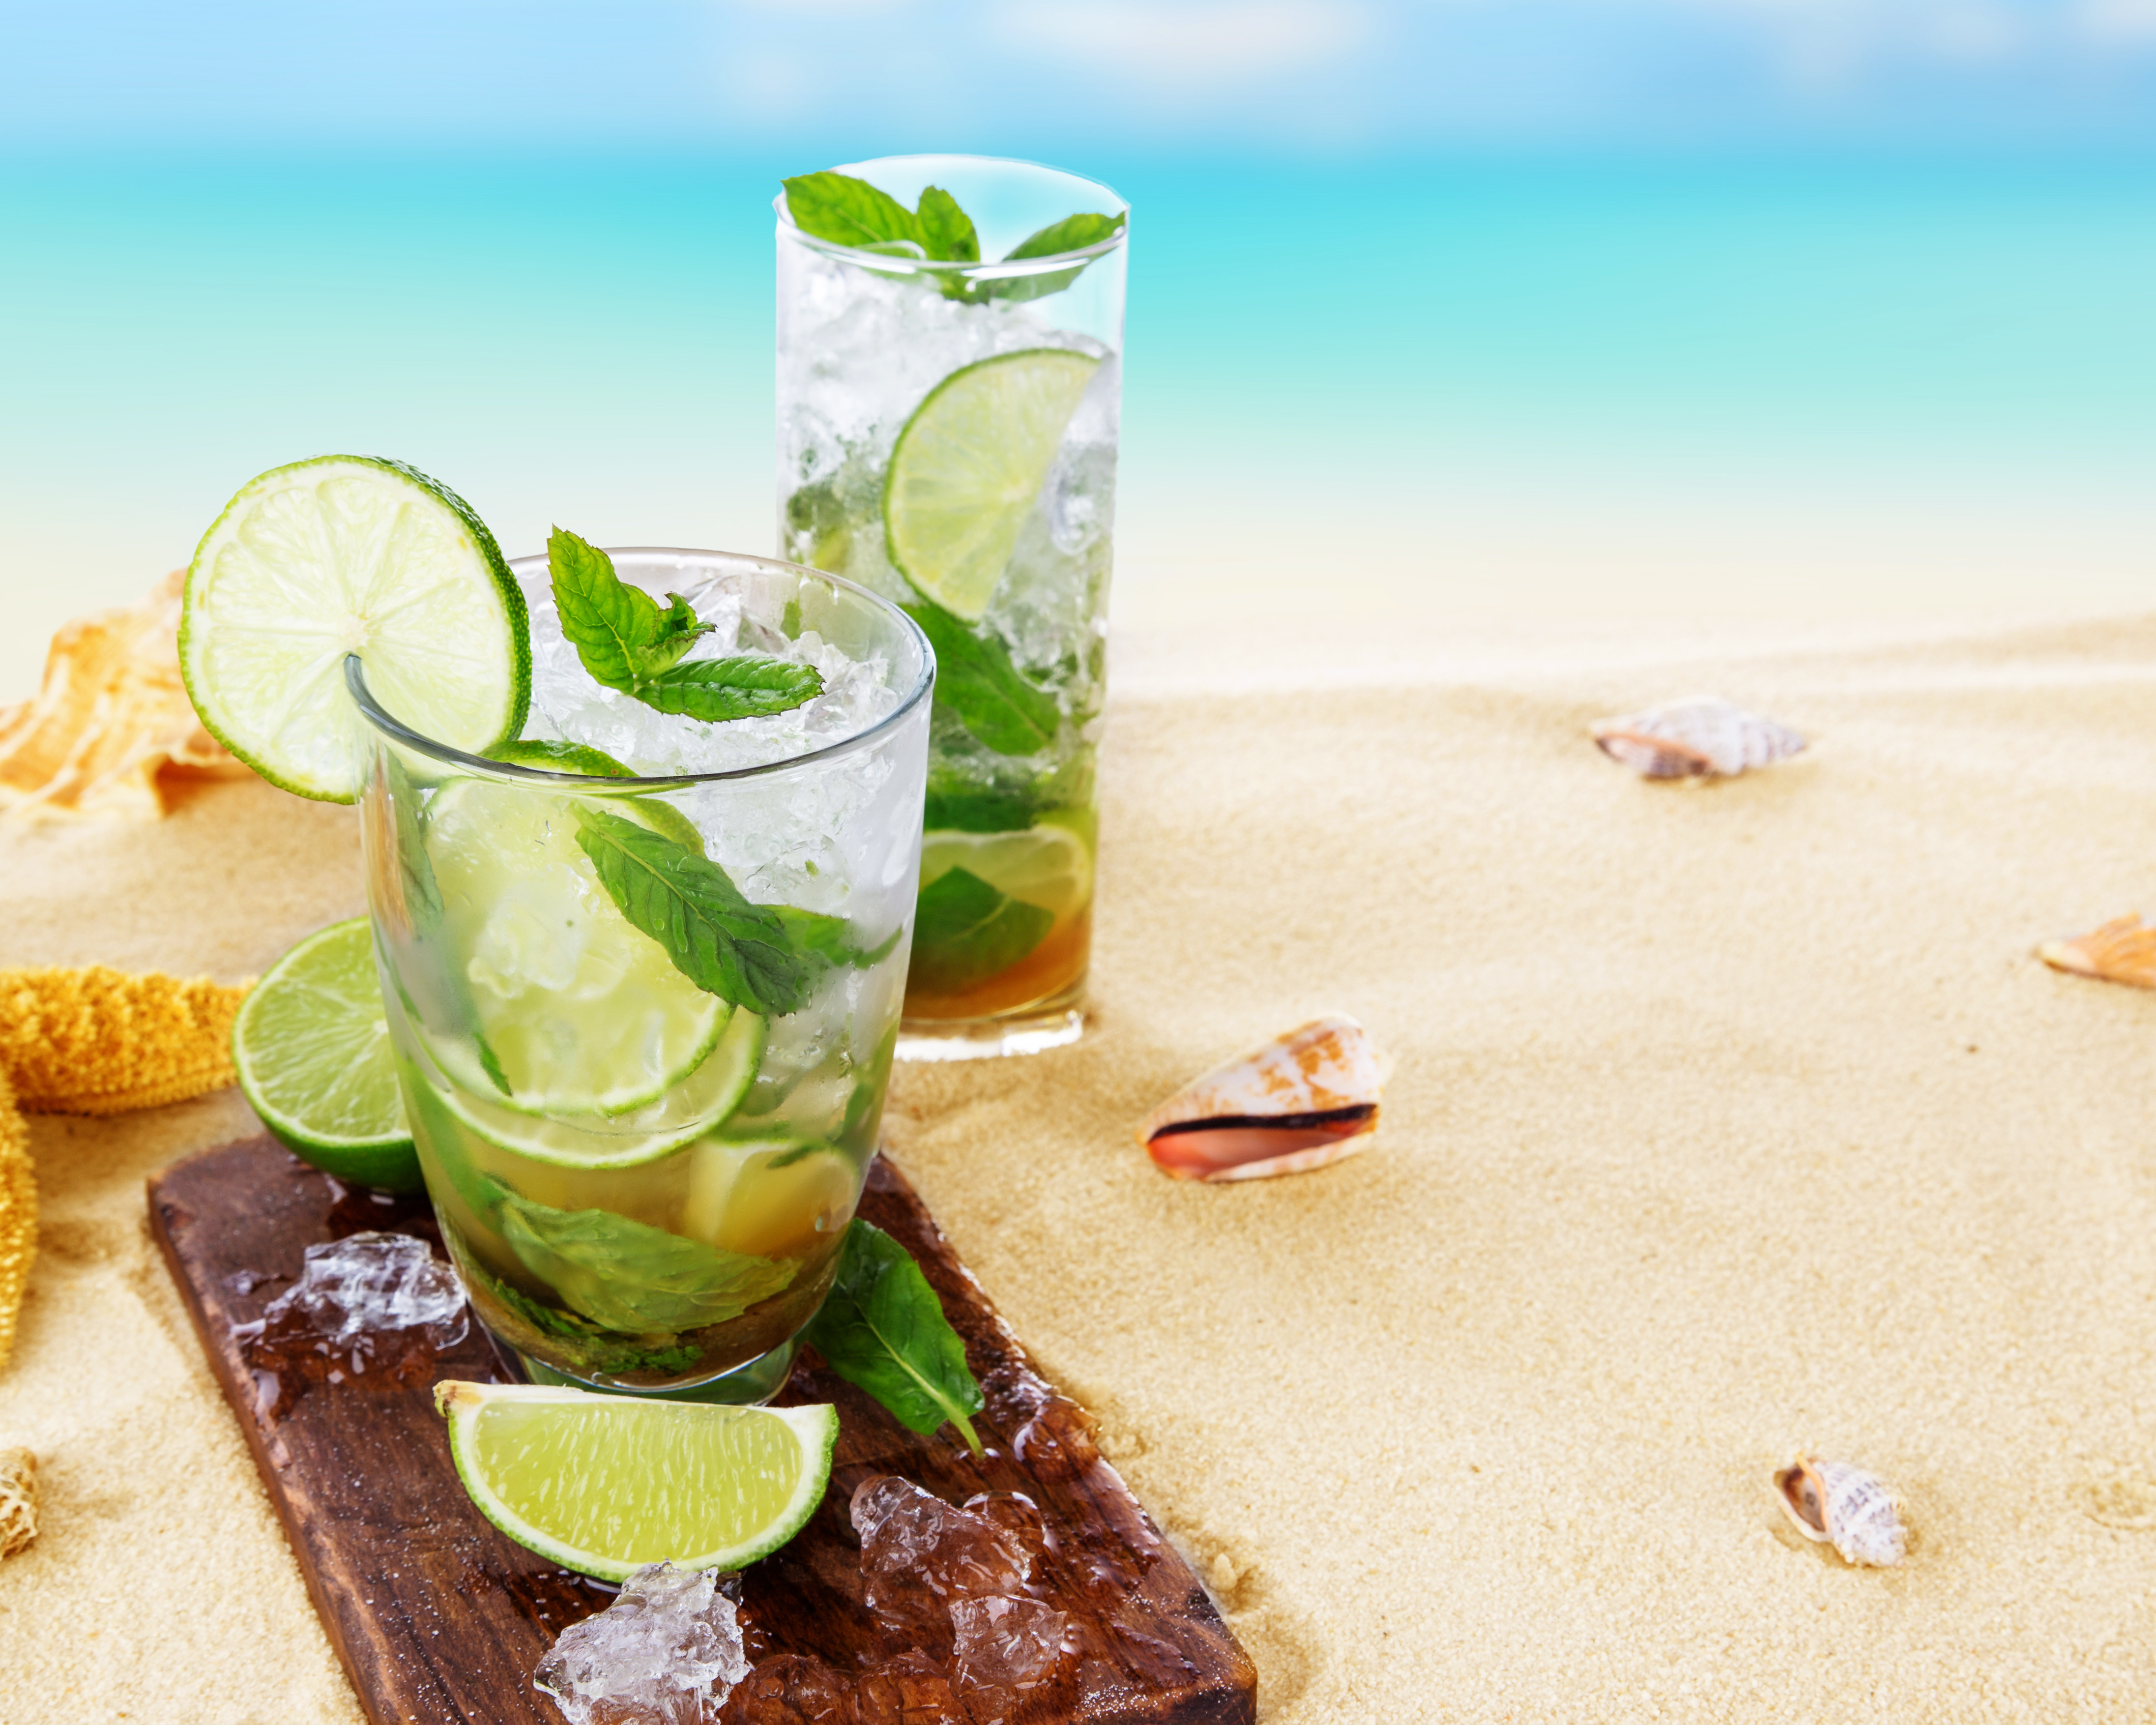 food, cocktail, drink, glass, ice, lime, mojito, sand, shell, summer